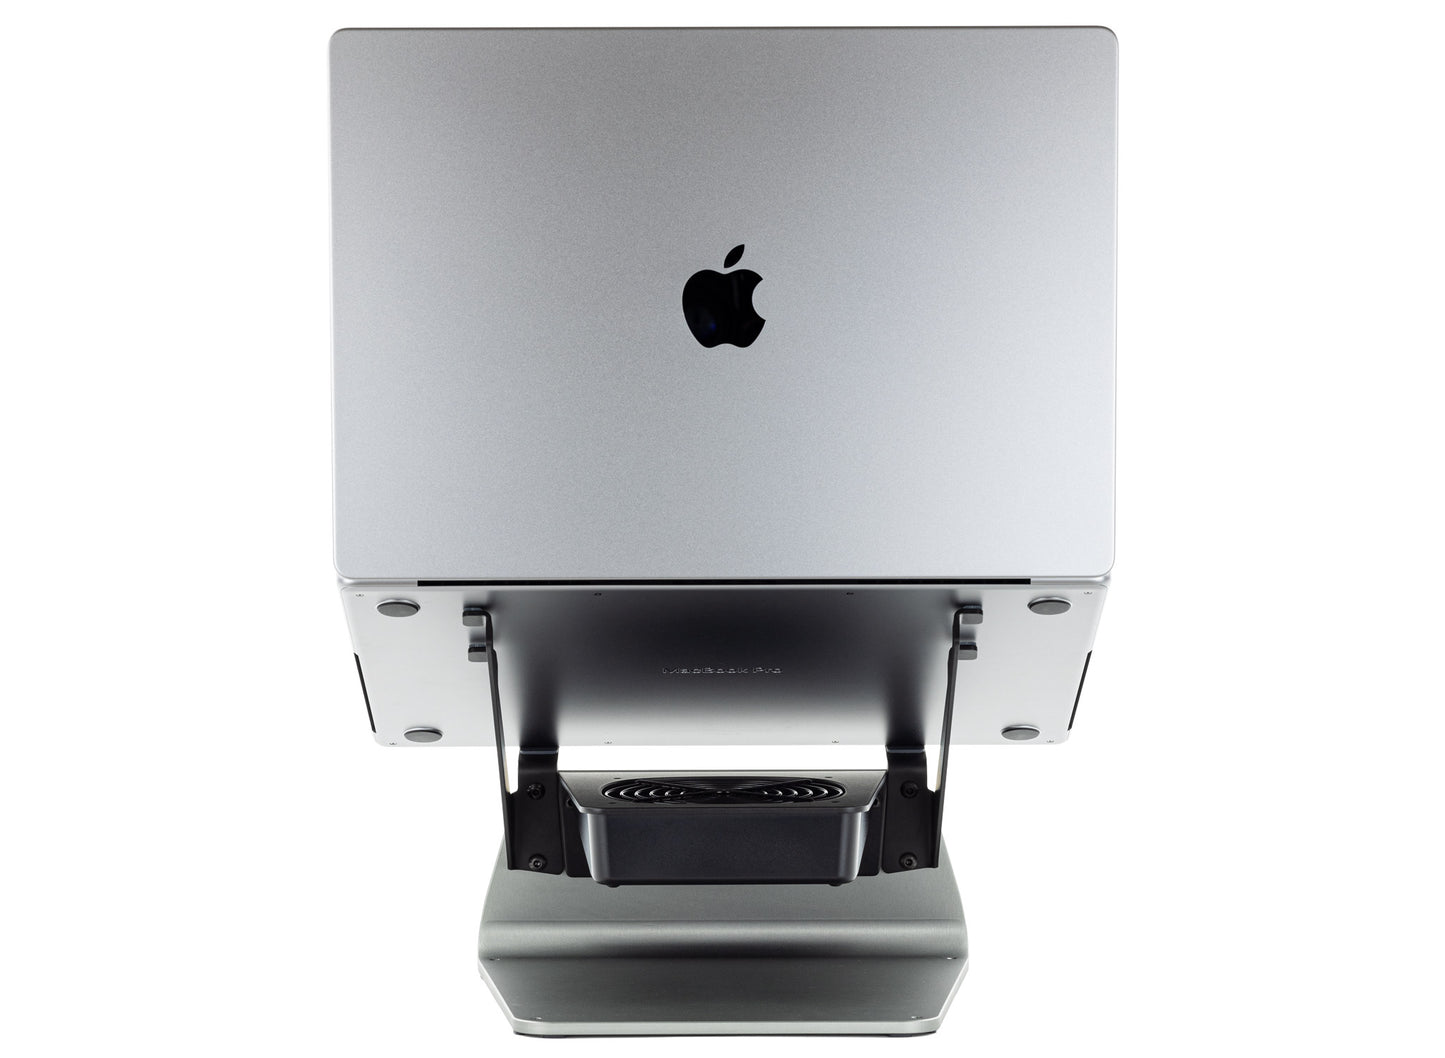 SVALT Cooling Stand model SxB14 gray back view for quiet fan cooling performance with Apple laptop 16-inch MacBook Pro M1 Max